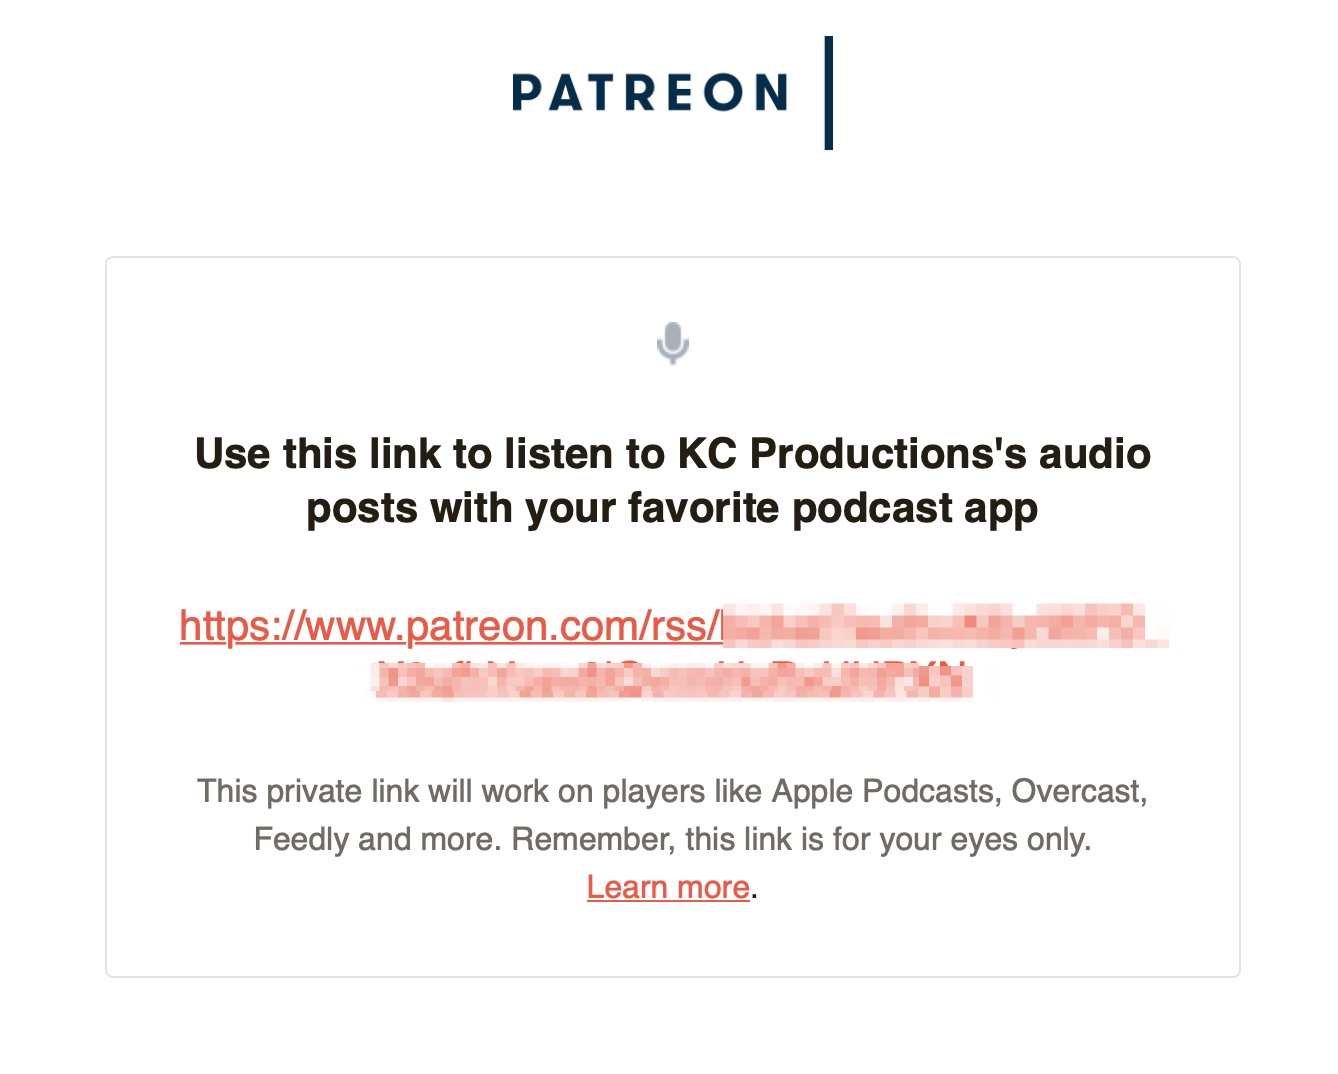 KC_Productions_now_supports_Audio_RSS_Feeds__-_katcanizares_gmail_com_-_Gmail.jpg